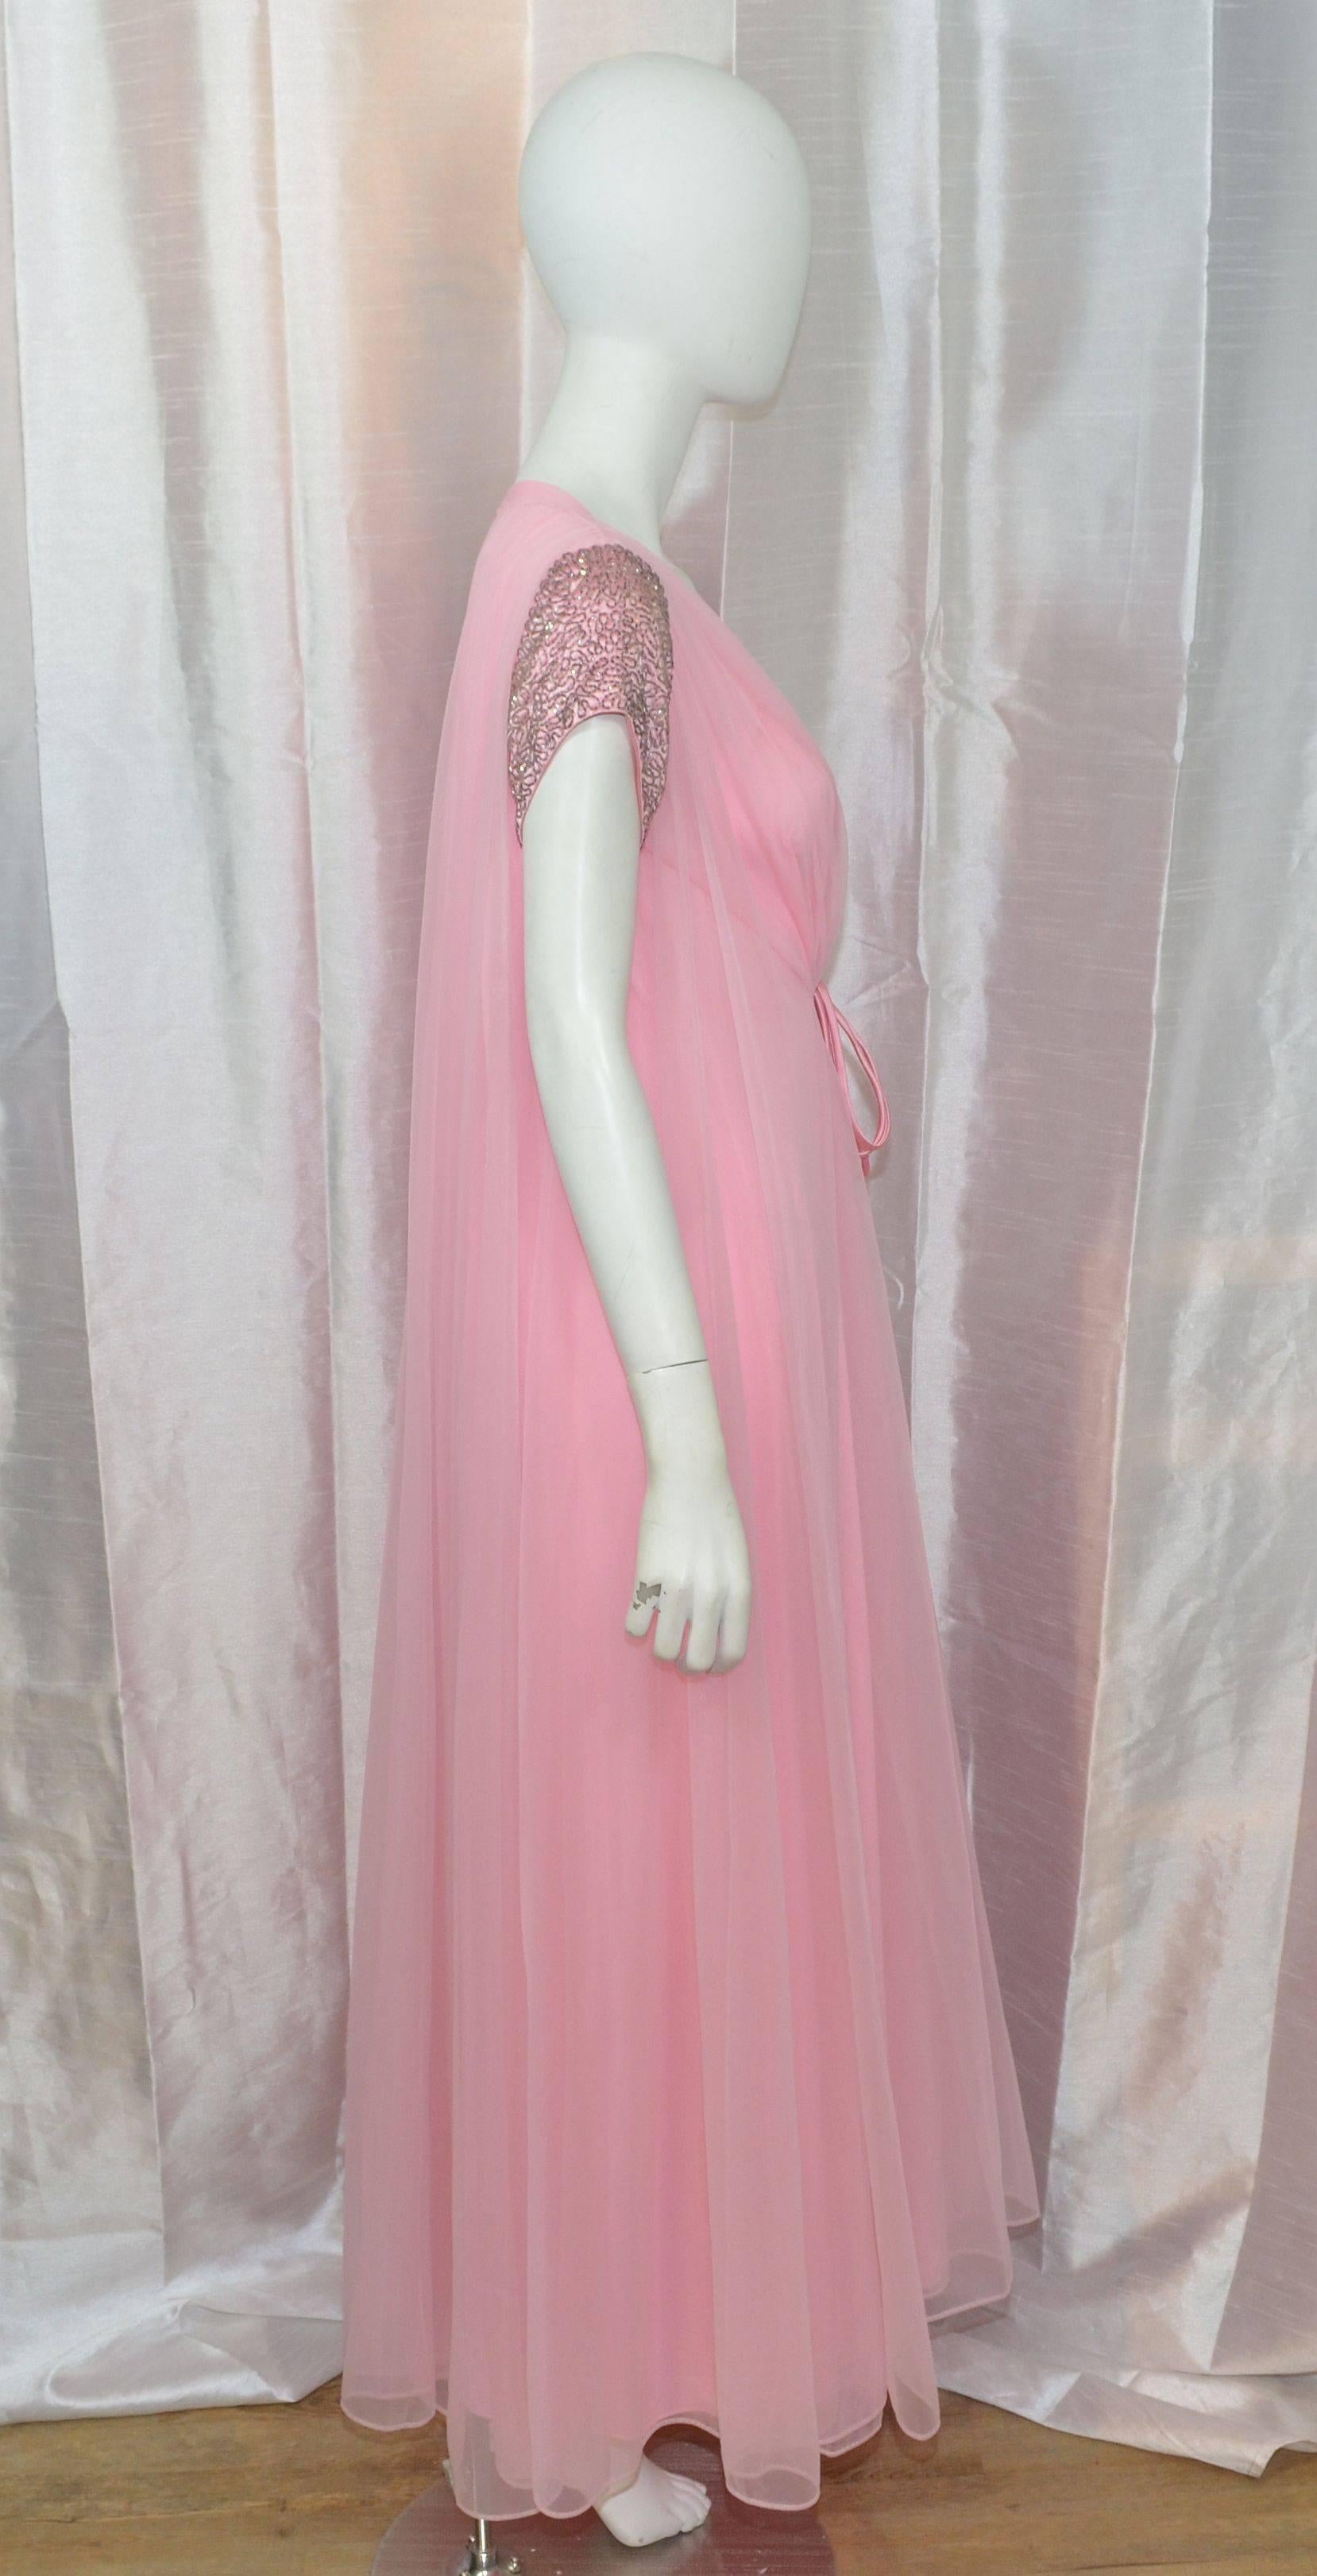 Vintage Confection by Claire Sandra for Lucie Ann from the 1960's. Features lightweight sheer layers of nylon with dual satin string tie closures at the front center with beaded sleeves. Ava Gabor would approve! Fully lined. Size M.

Measurements: